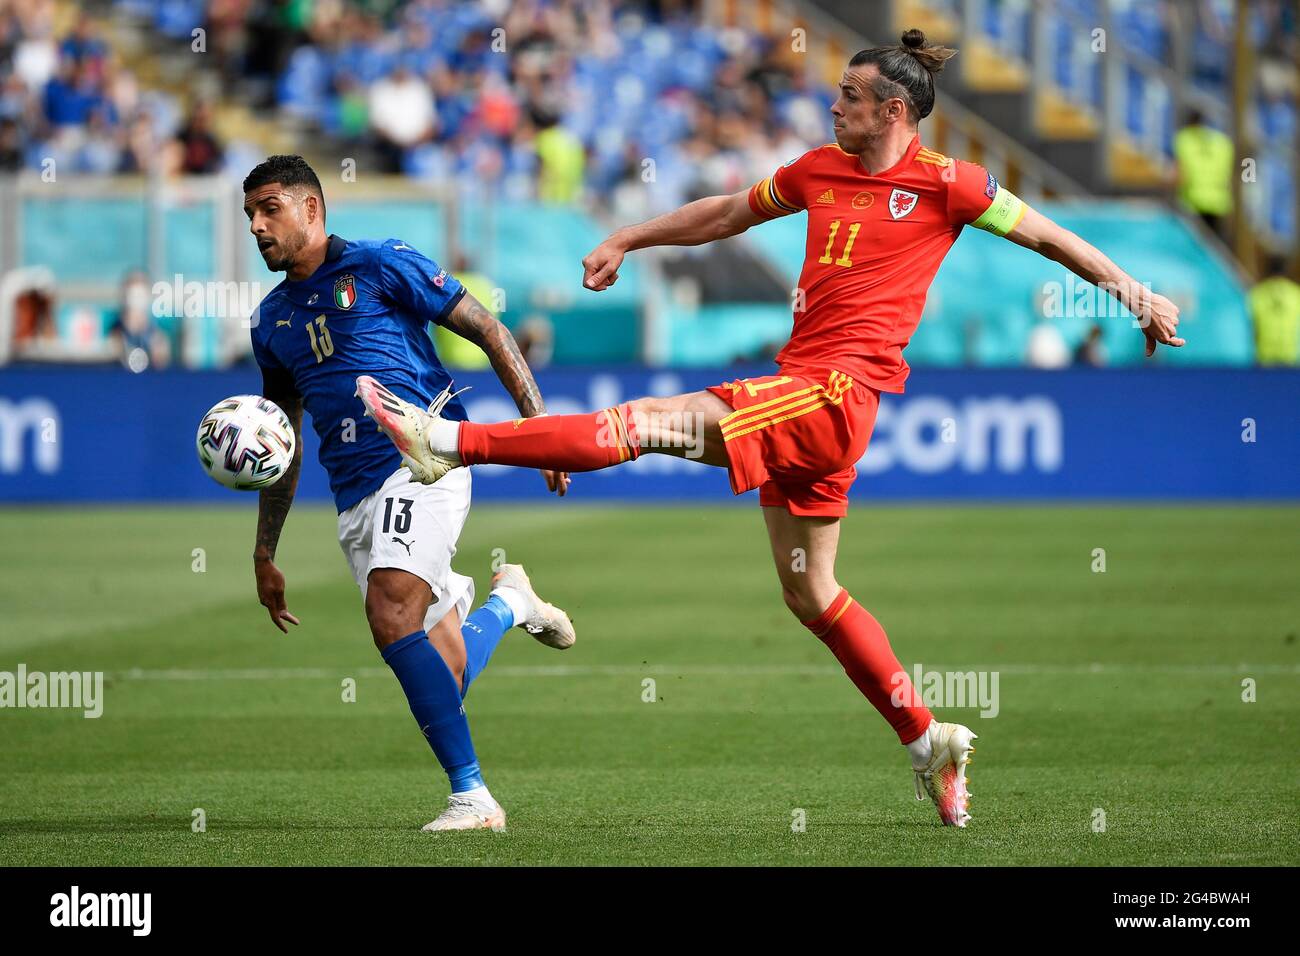 Roma, Italy. 20th June, 2021. Emerson Palmieri Dos Santos of Italy and Gareth Bale of Wales compete for the ball during the Uefa Euro 2020 Group A football match between Italy and Wales at stadio Olimpico in Rome (Italy), June 20th, 2021. Photo Andrea Staccioli/Insidefoto Credit: insidefoto srl/Alamy Live News Stock Photo